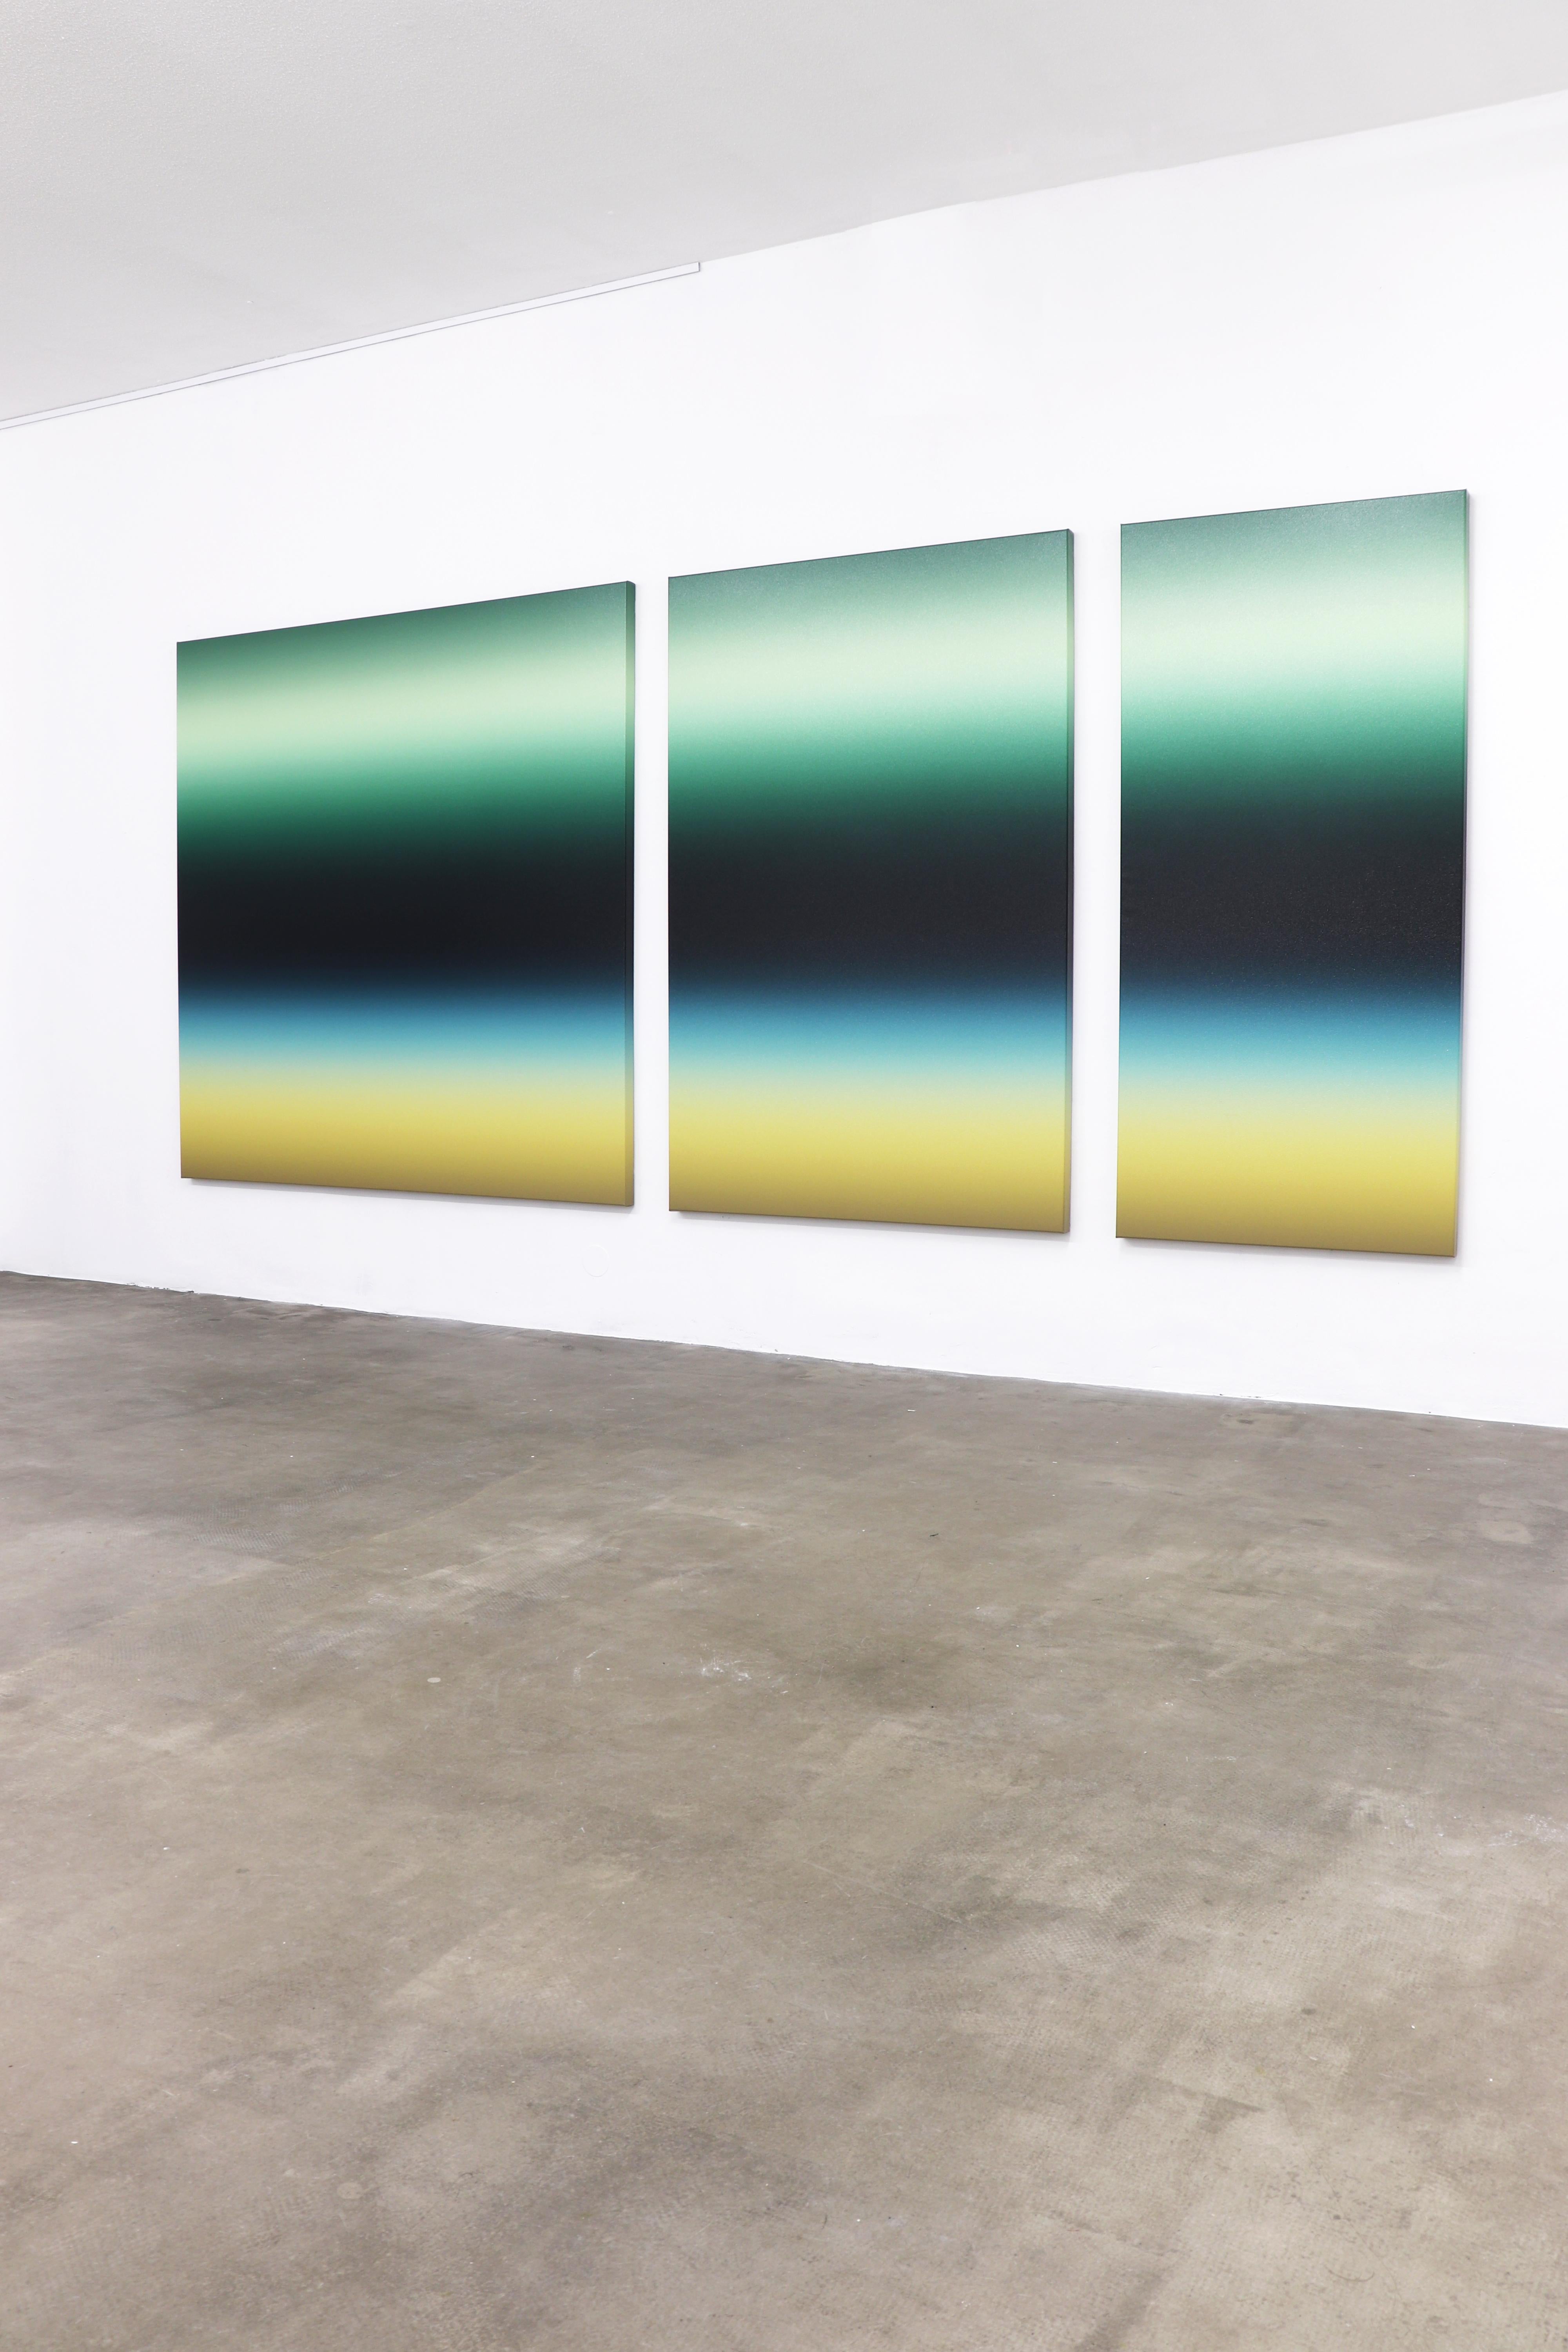 180 x ±405 cm (180 x 180 cm / 180 x 120 cm/ 180 x 85 cm)

Fascinated by the possibilities of oil paint in relation to its materiality, Donald's work is visualised through the creation of subtle colour gradients that express rhythm, depth and